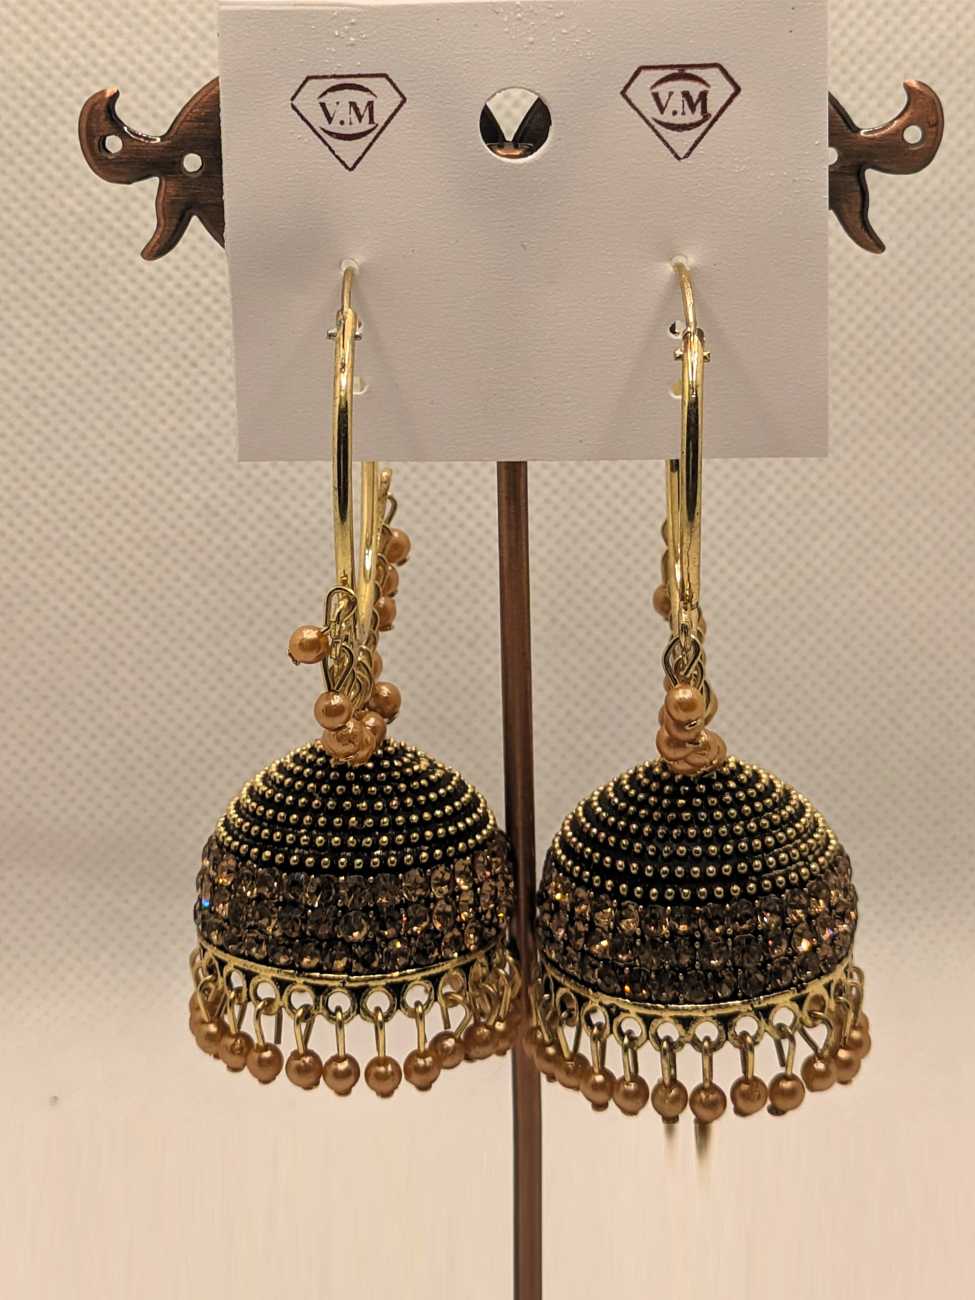 Oxidized gold-plated Bali earrings with intricate beadwork and coiled wire designs